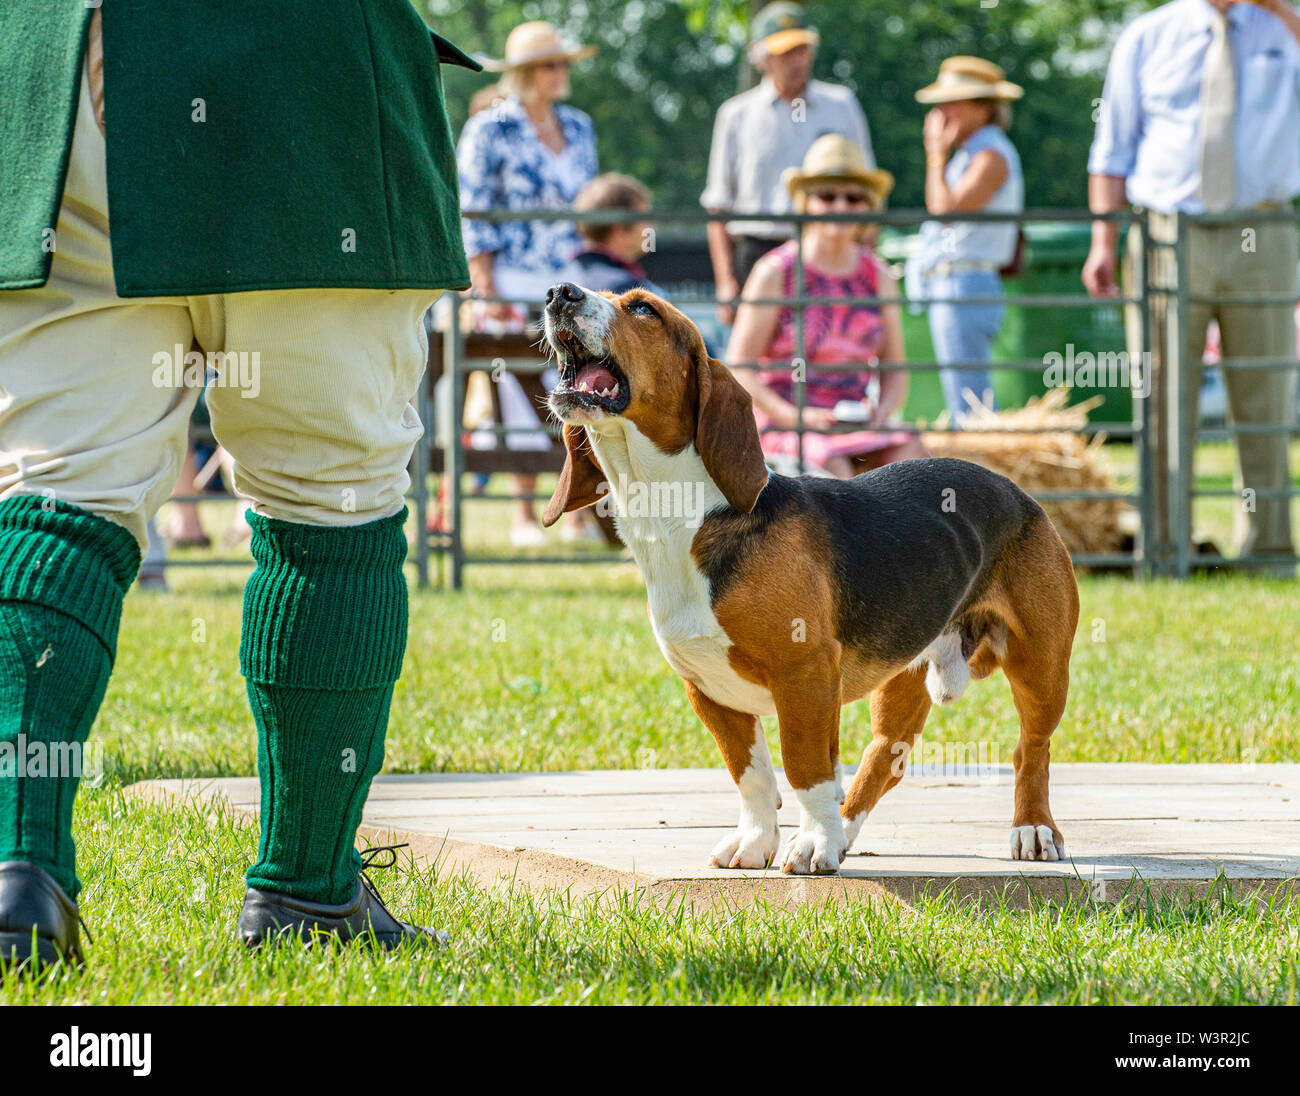 Festival of Hunting, Peterborough, UK. 17th July 2019. The annual Festival of Hunting is a one-day event boasting the greatest gathering of hounds in the country.  Harriers, Beagles, Basset Hounds, Draghounds and Bloodhounds will be competing along with displays of fell hounds, coursing dogs, and the popular Sealey Terriers.  Credit: Matt Limb OBE/Alamy Live News Stock Photo